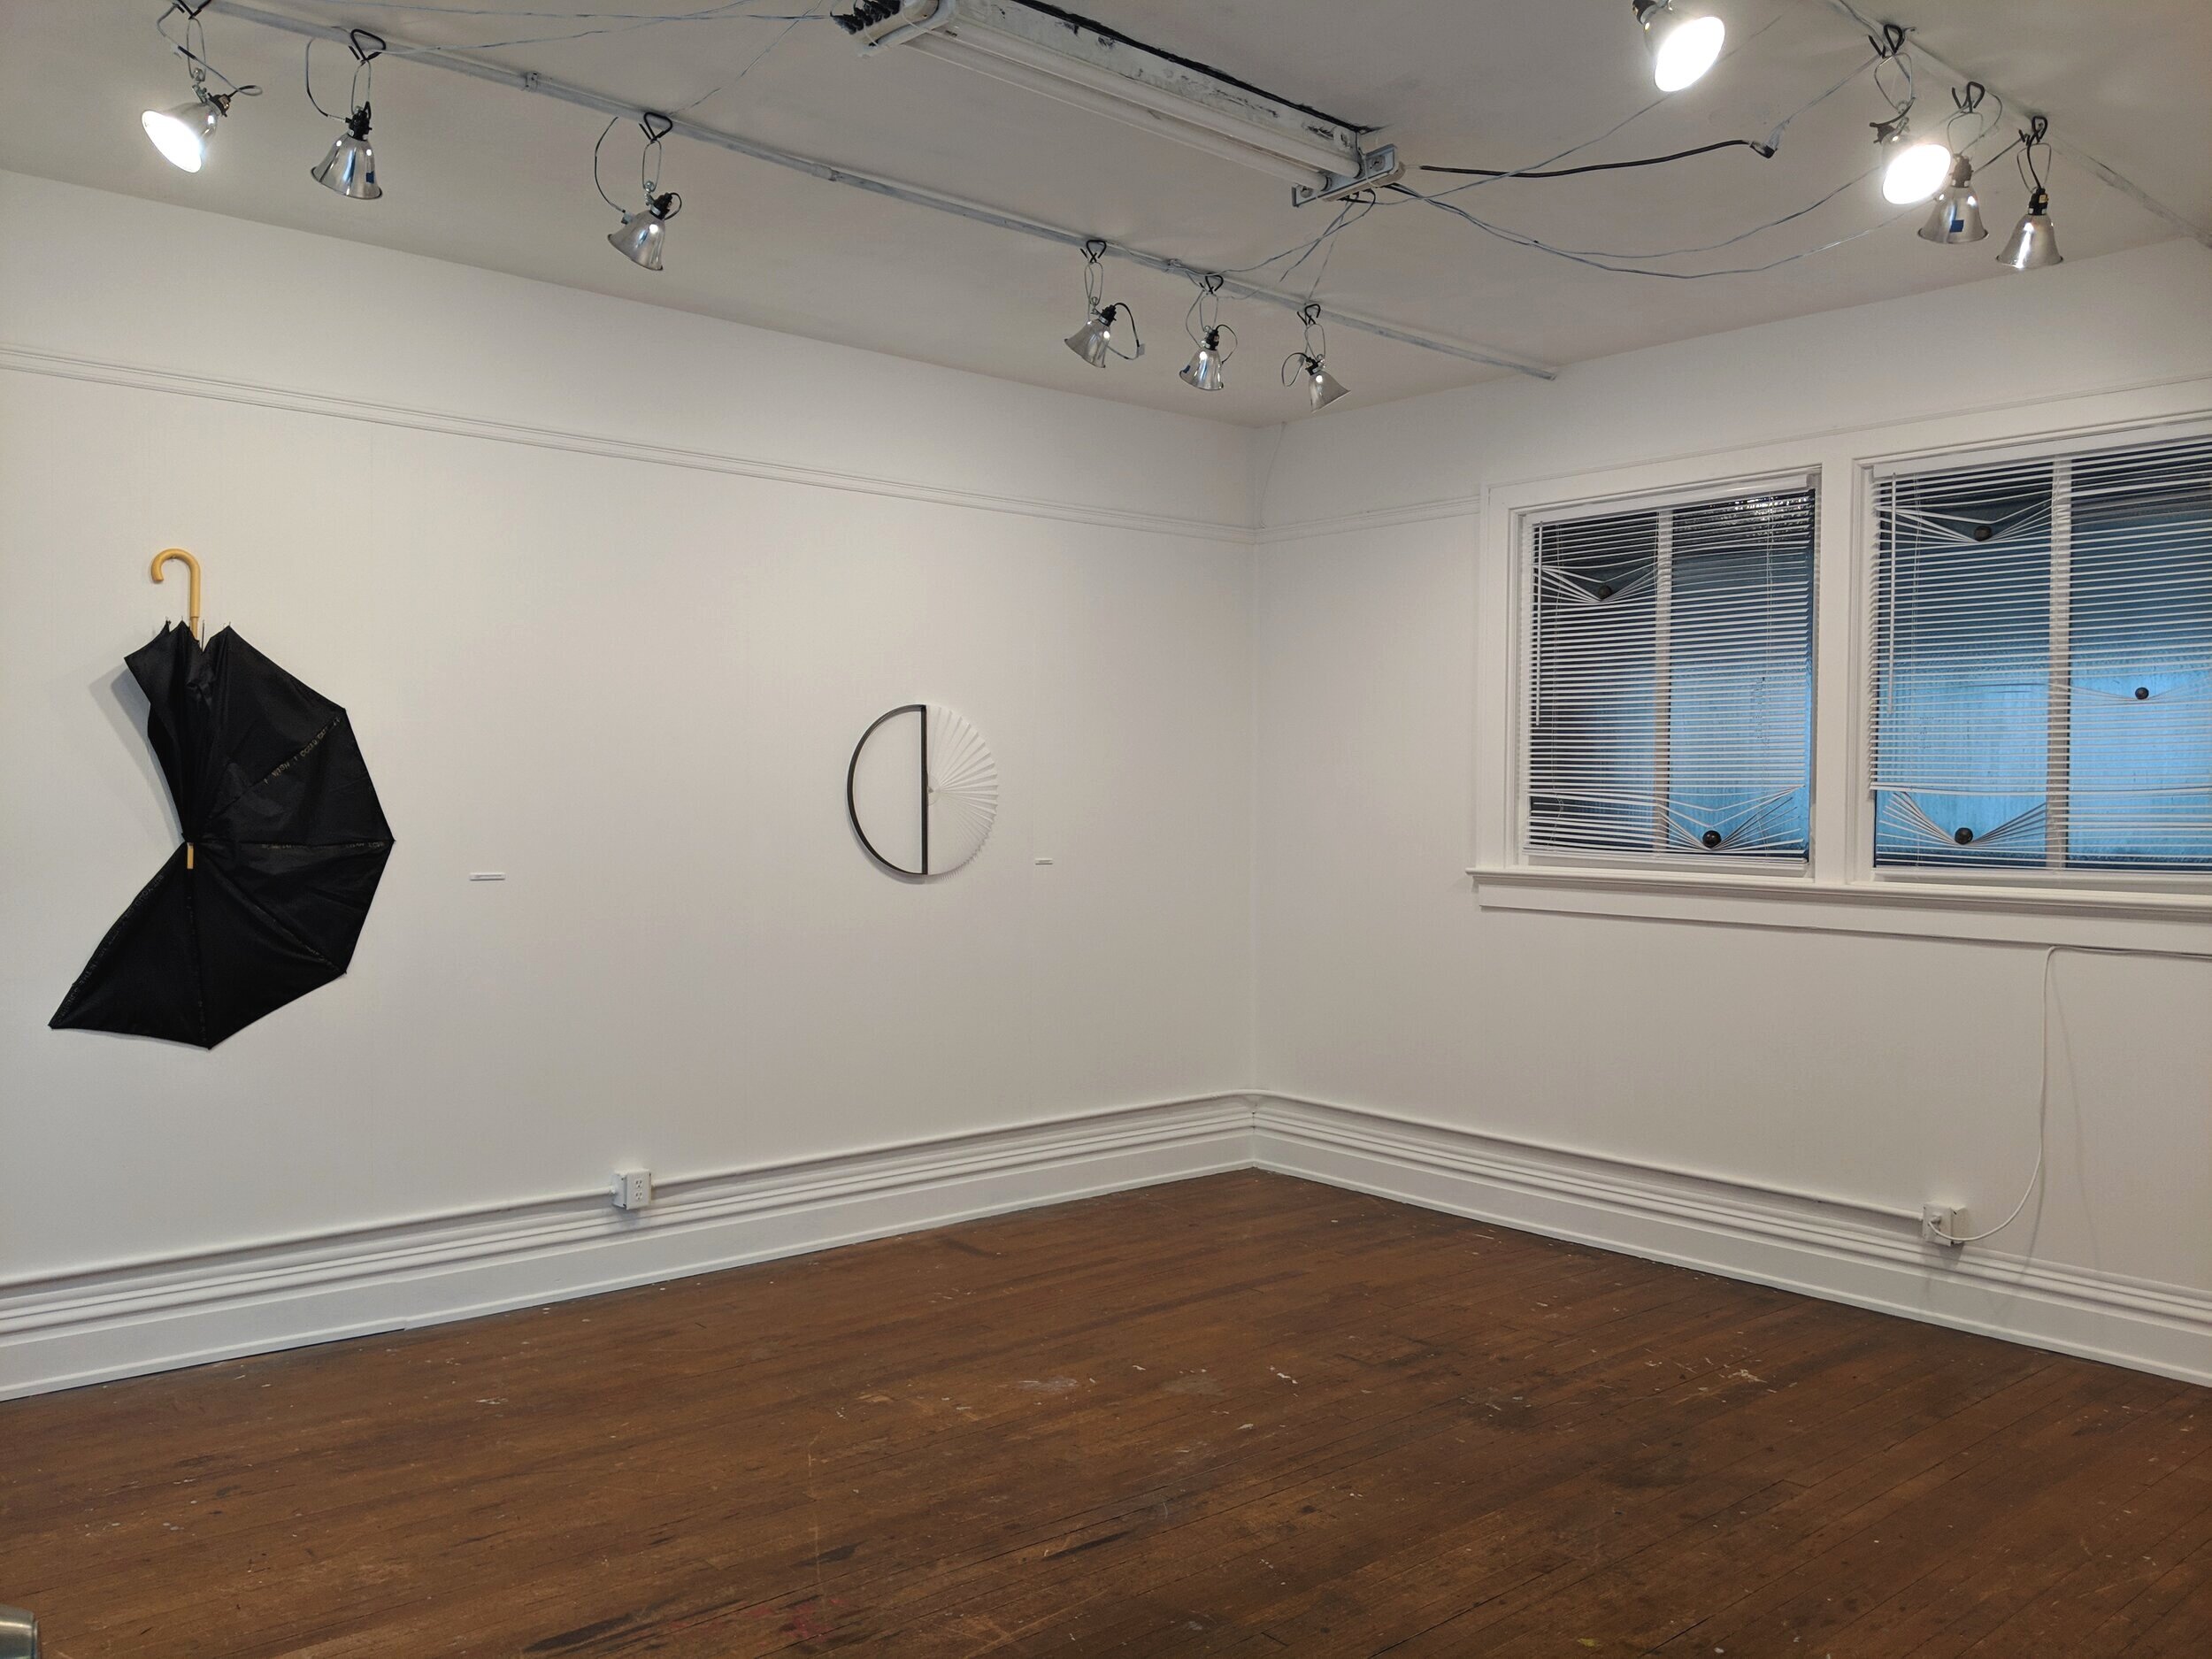  (left to right)    I promised I’d leave you out of this , umbrella. 2019;  Who are we kidding?,  pleated fabric shade, steel. 2019;  In advance of a broken heart , vinyl mini blinds, steel. 2019 